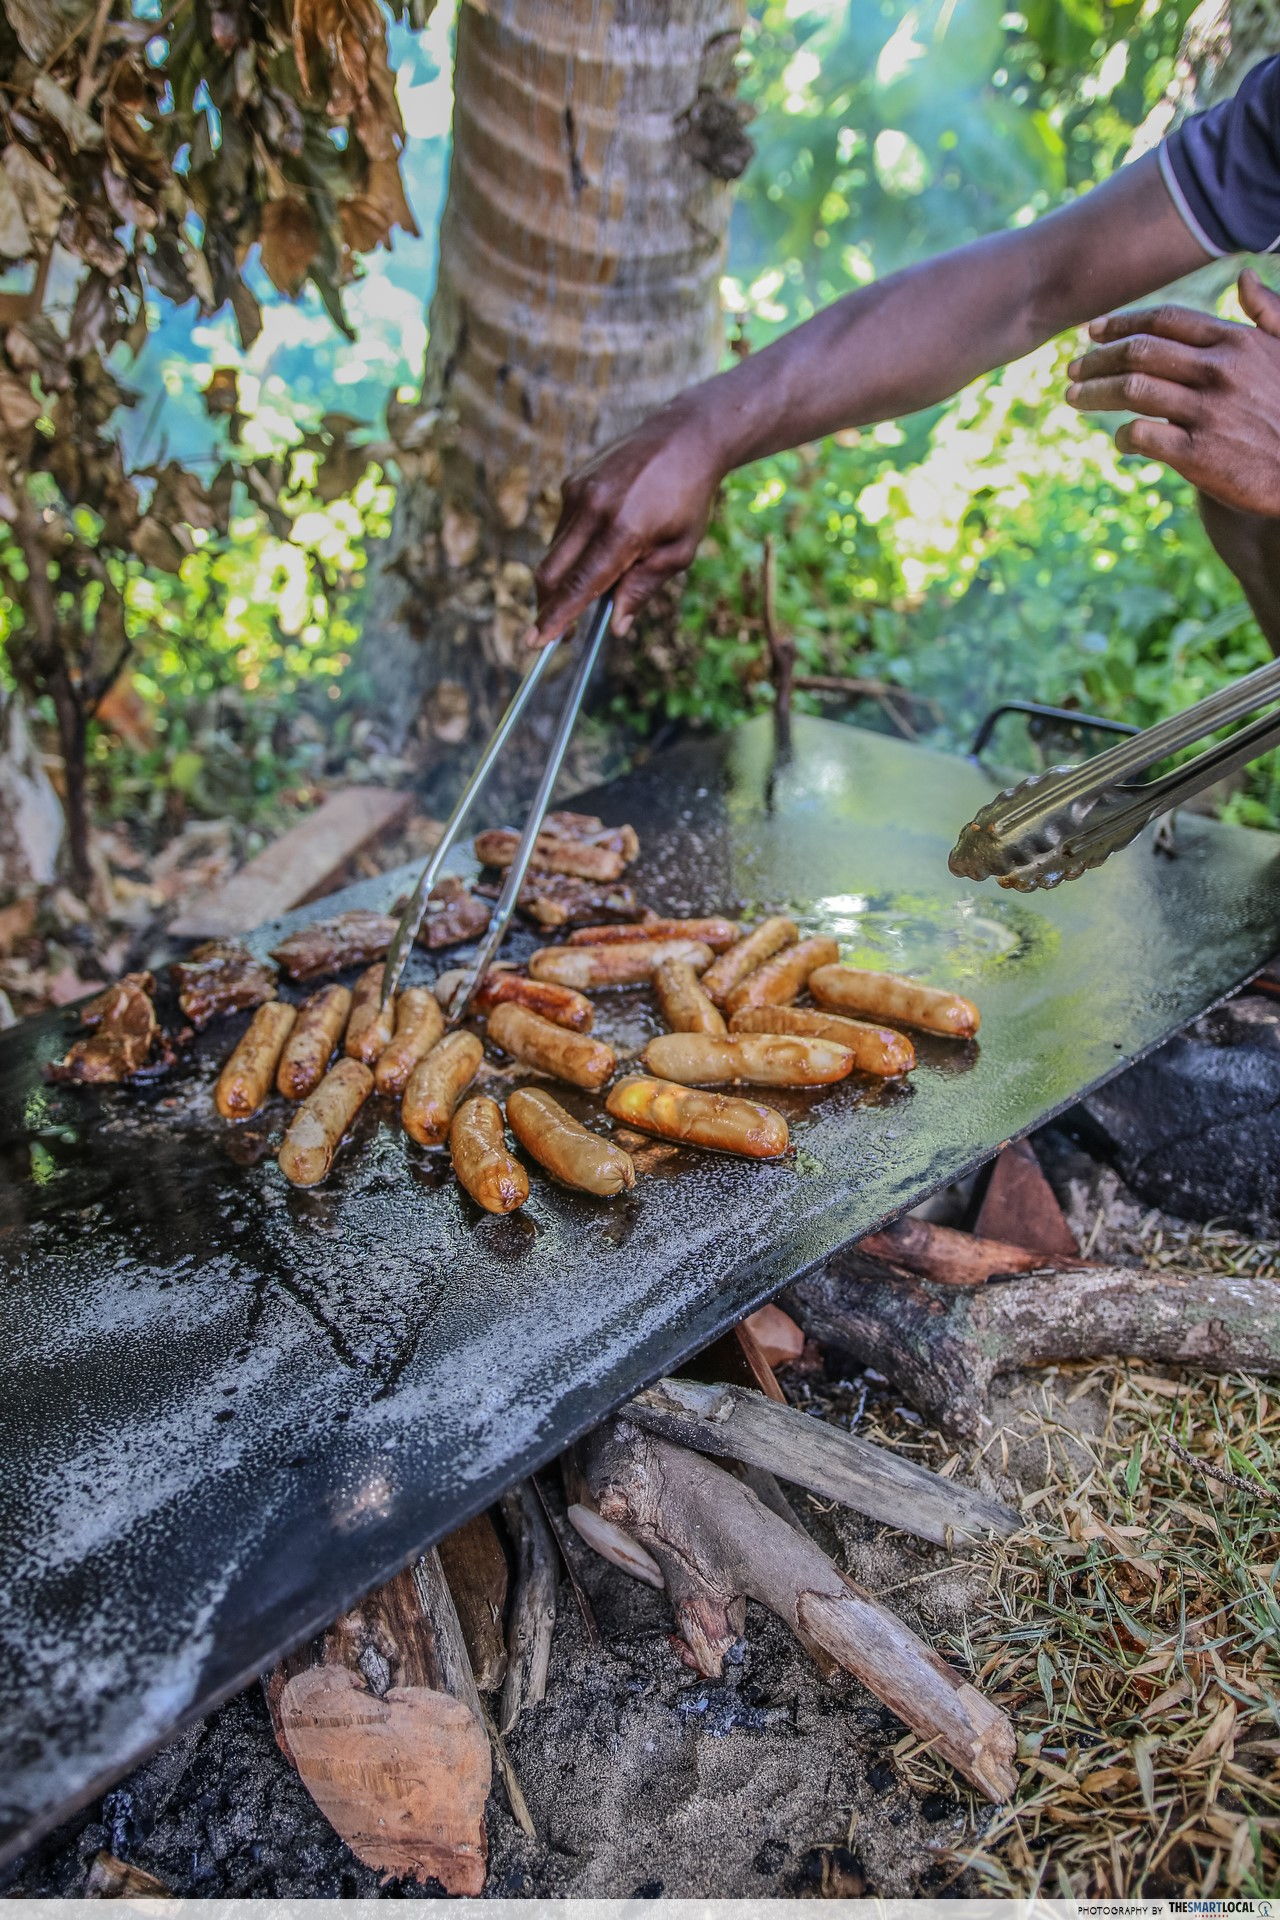 lunch field camp-style on private island, grilling with rocks and coal, Fiji Islands